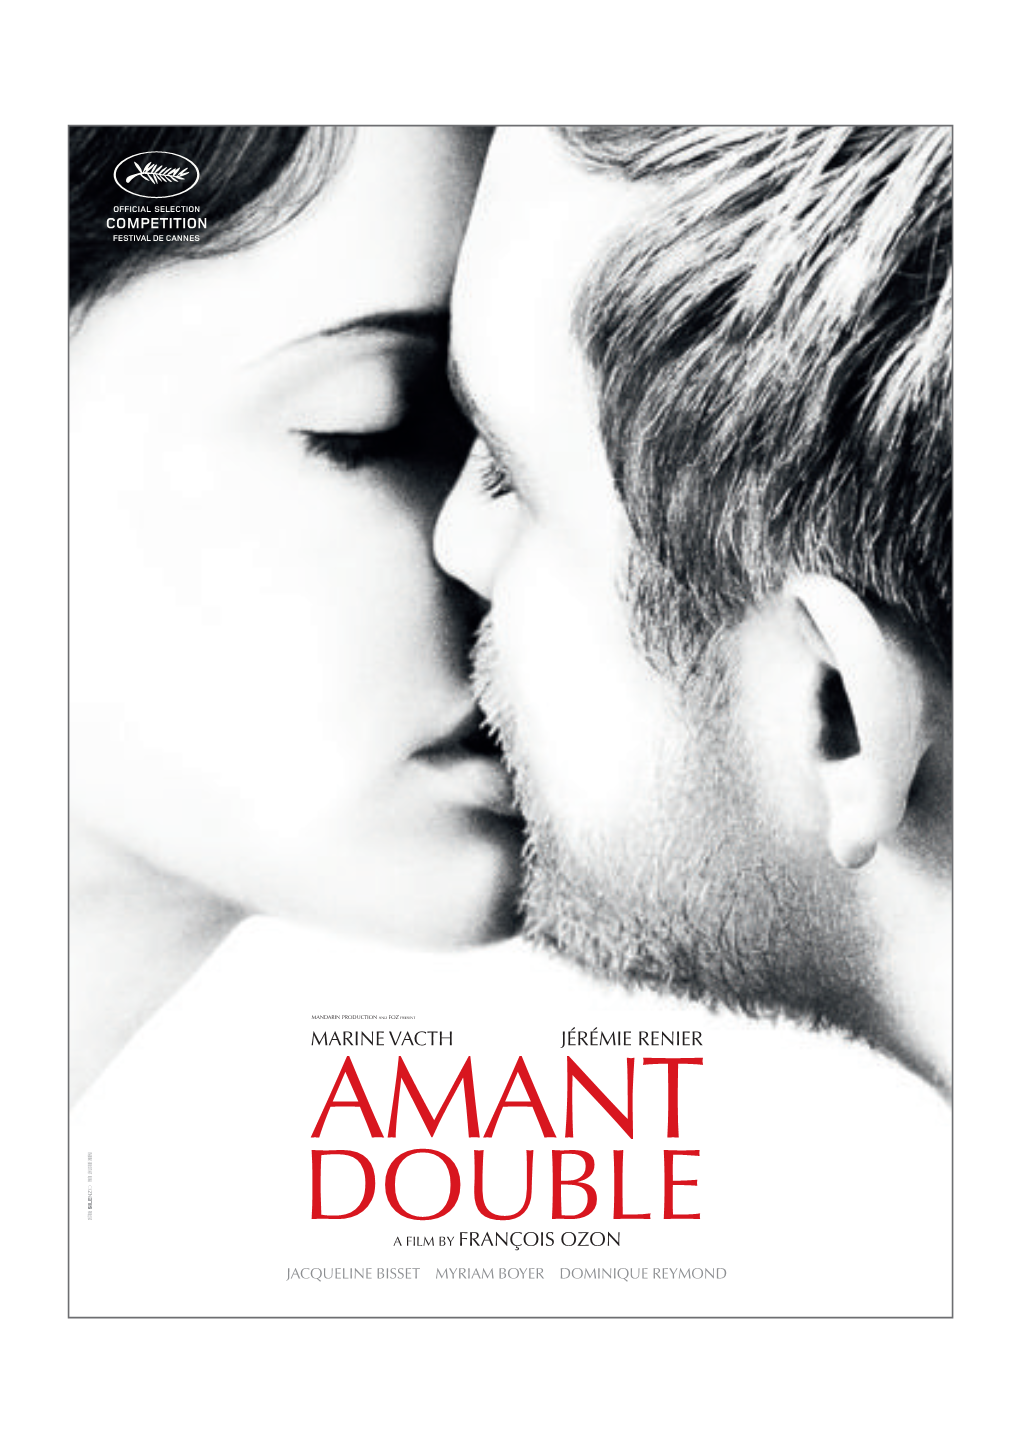 AMANT DOUBLE DP ANGLAIS.Indd